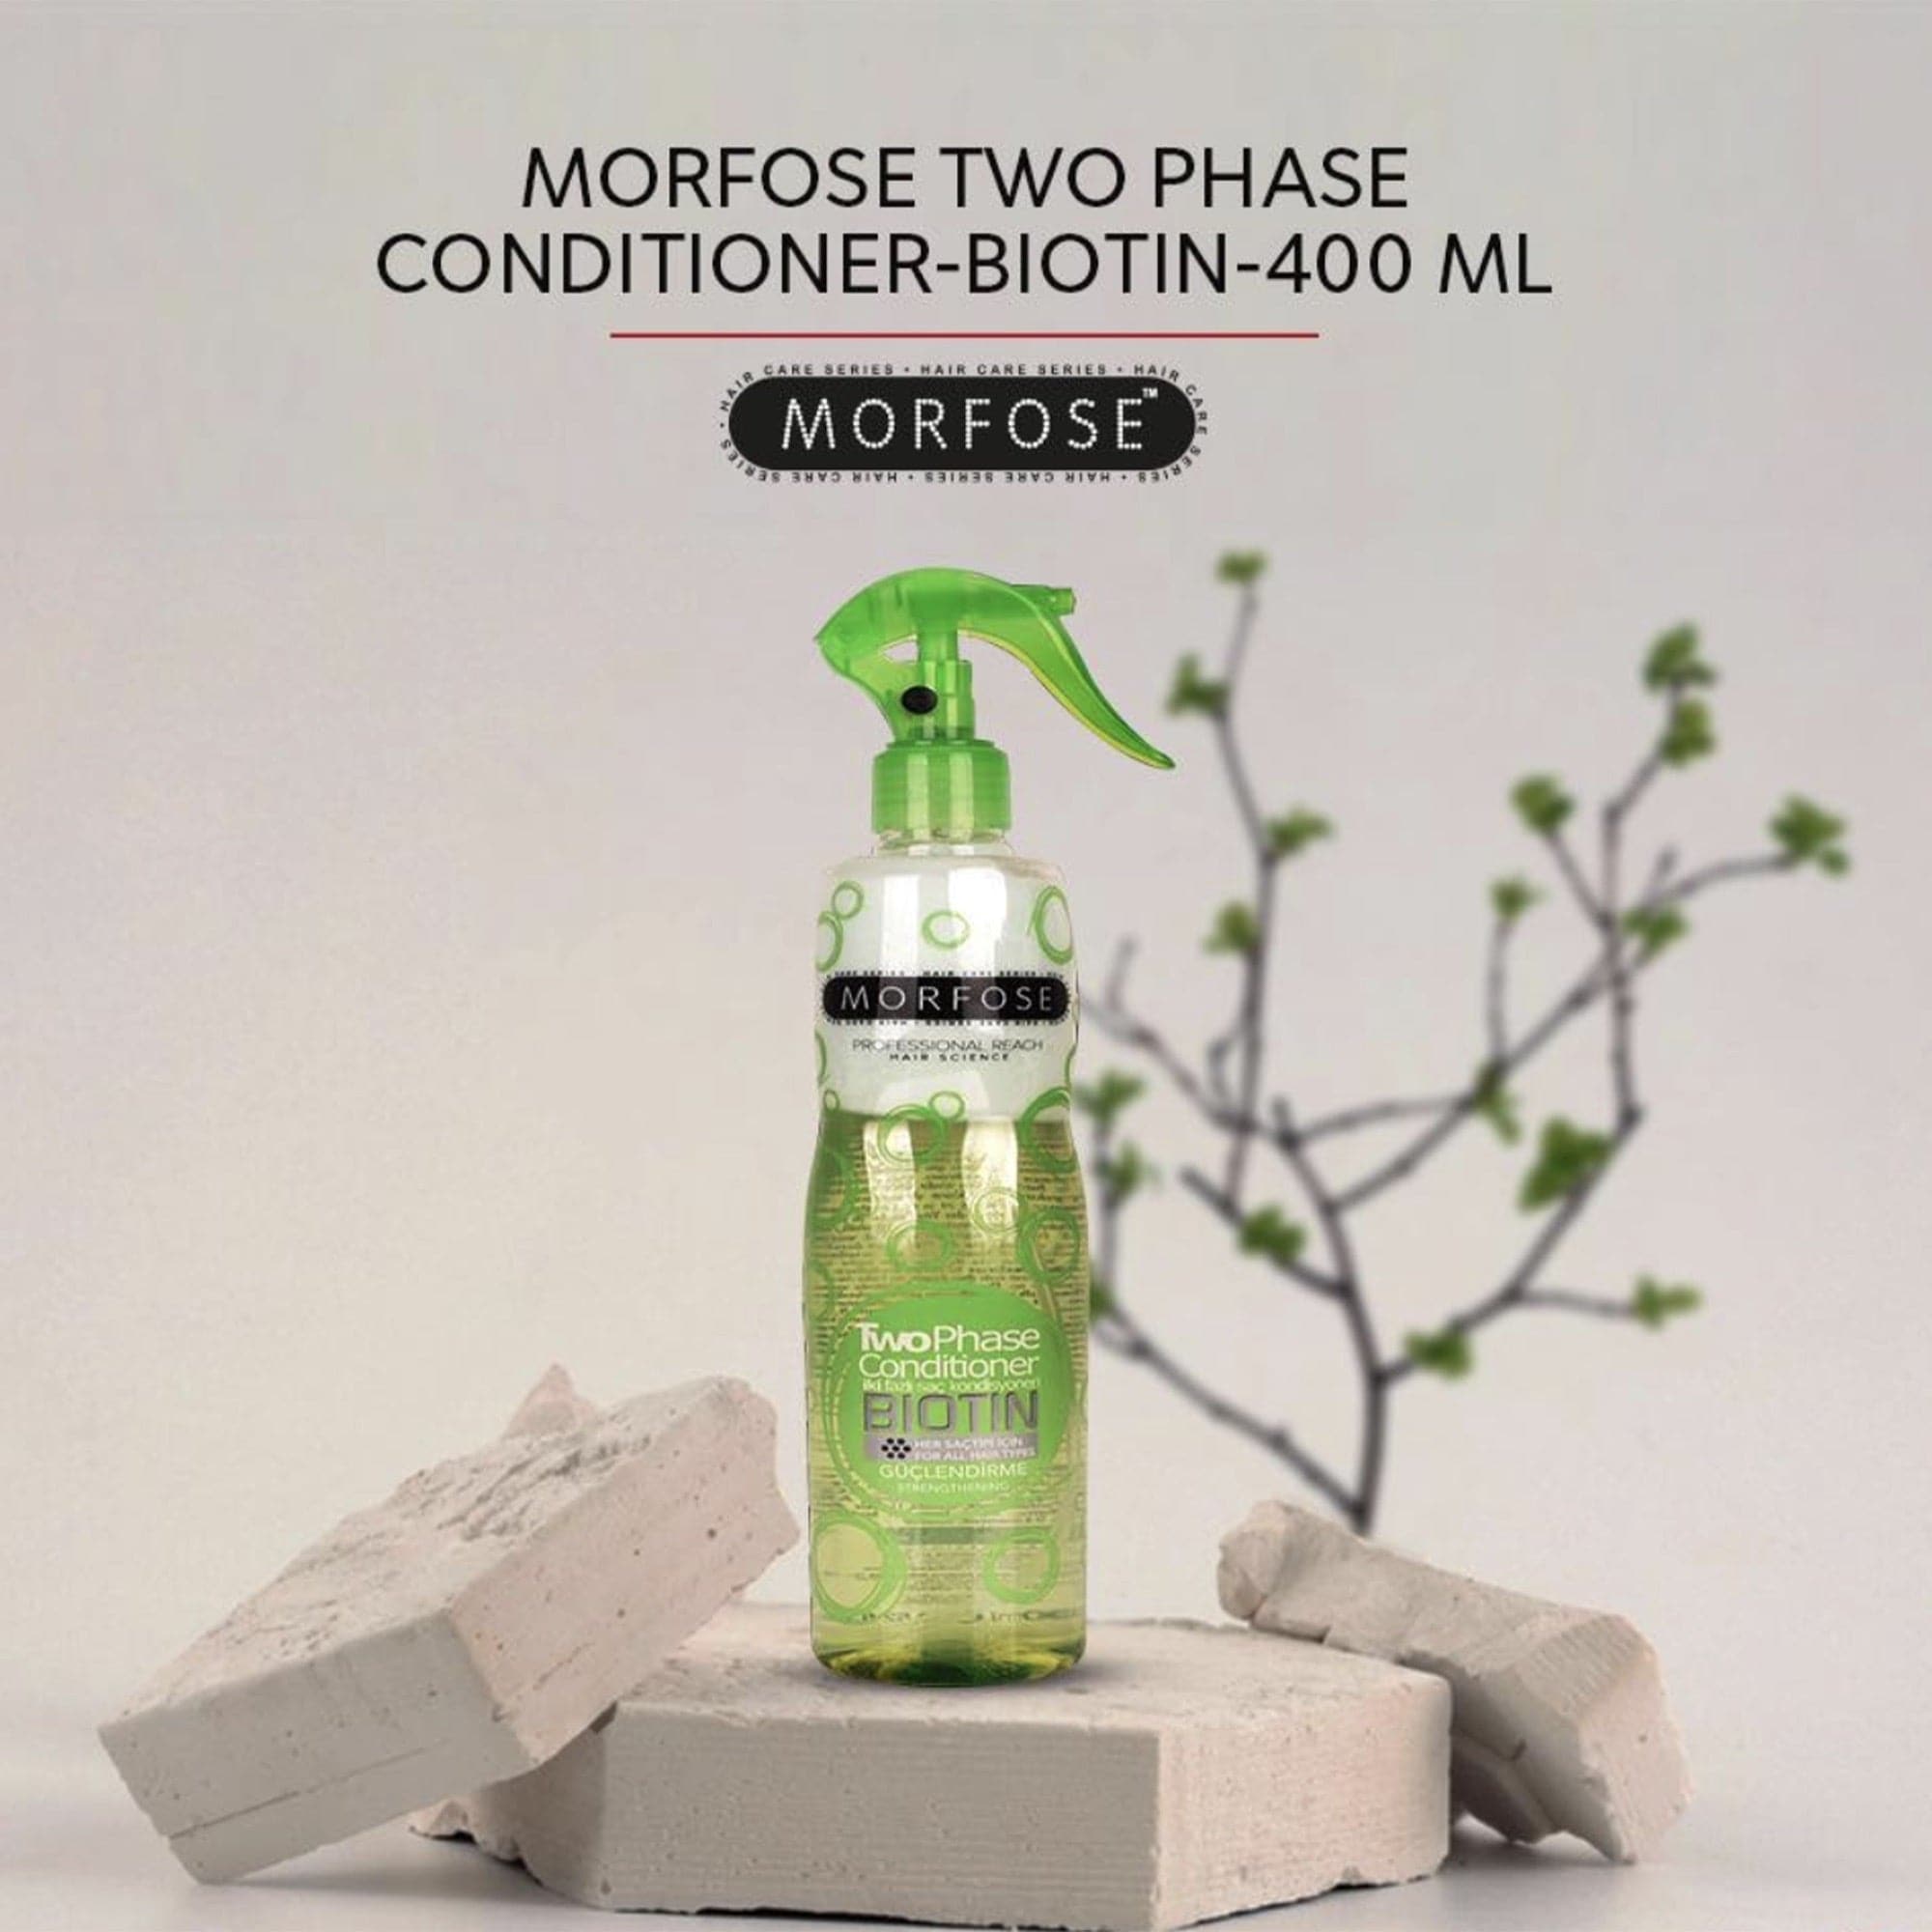 Morfose - Biotin Two Phase Hair Conditioner 400ml